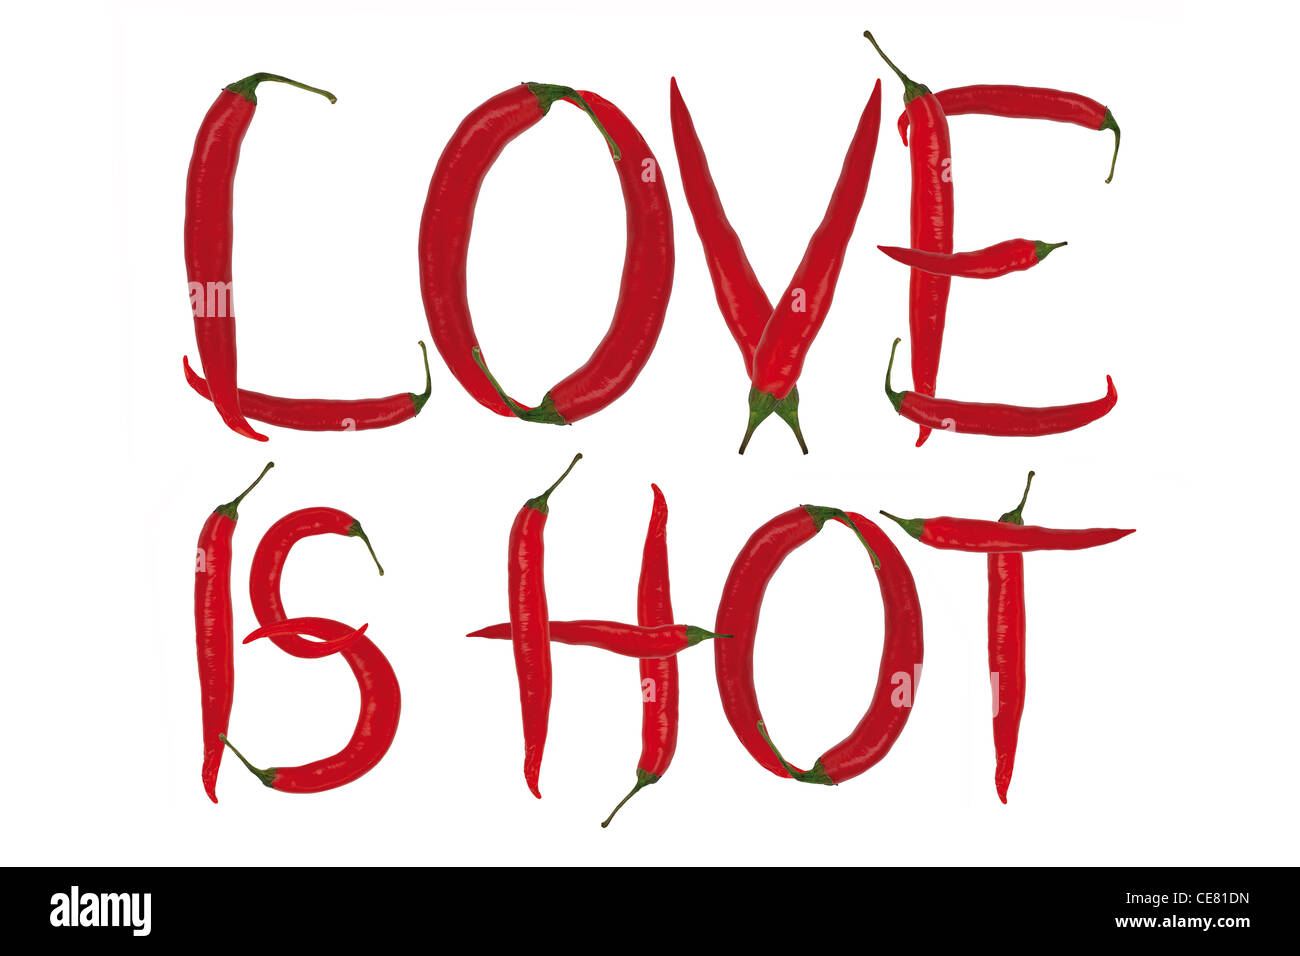 inscription love is hot made from red chili peppers isolated on white background Stock Photo